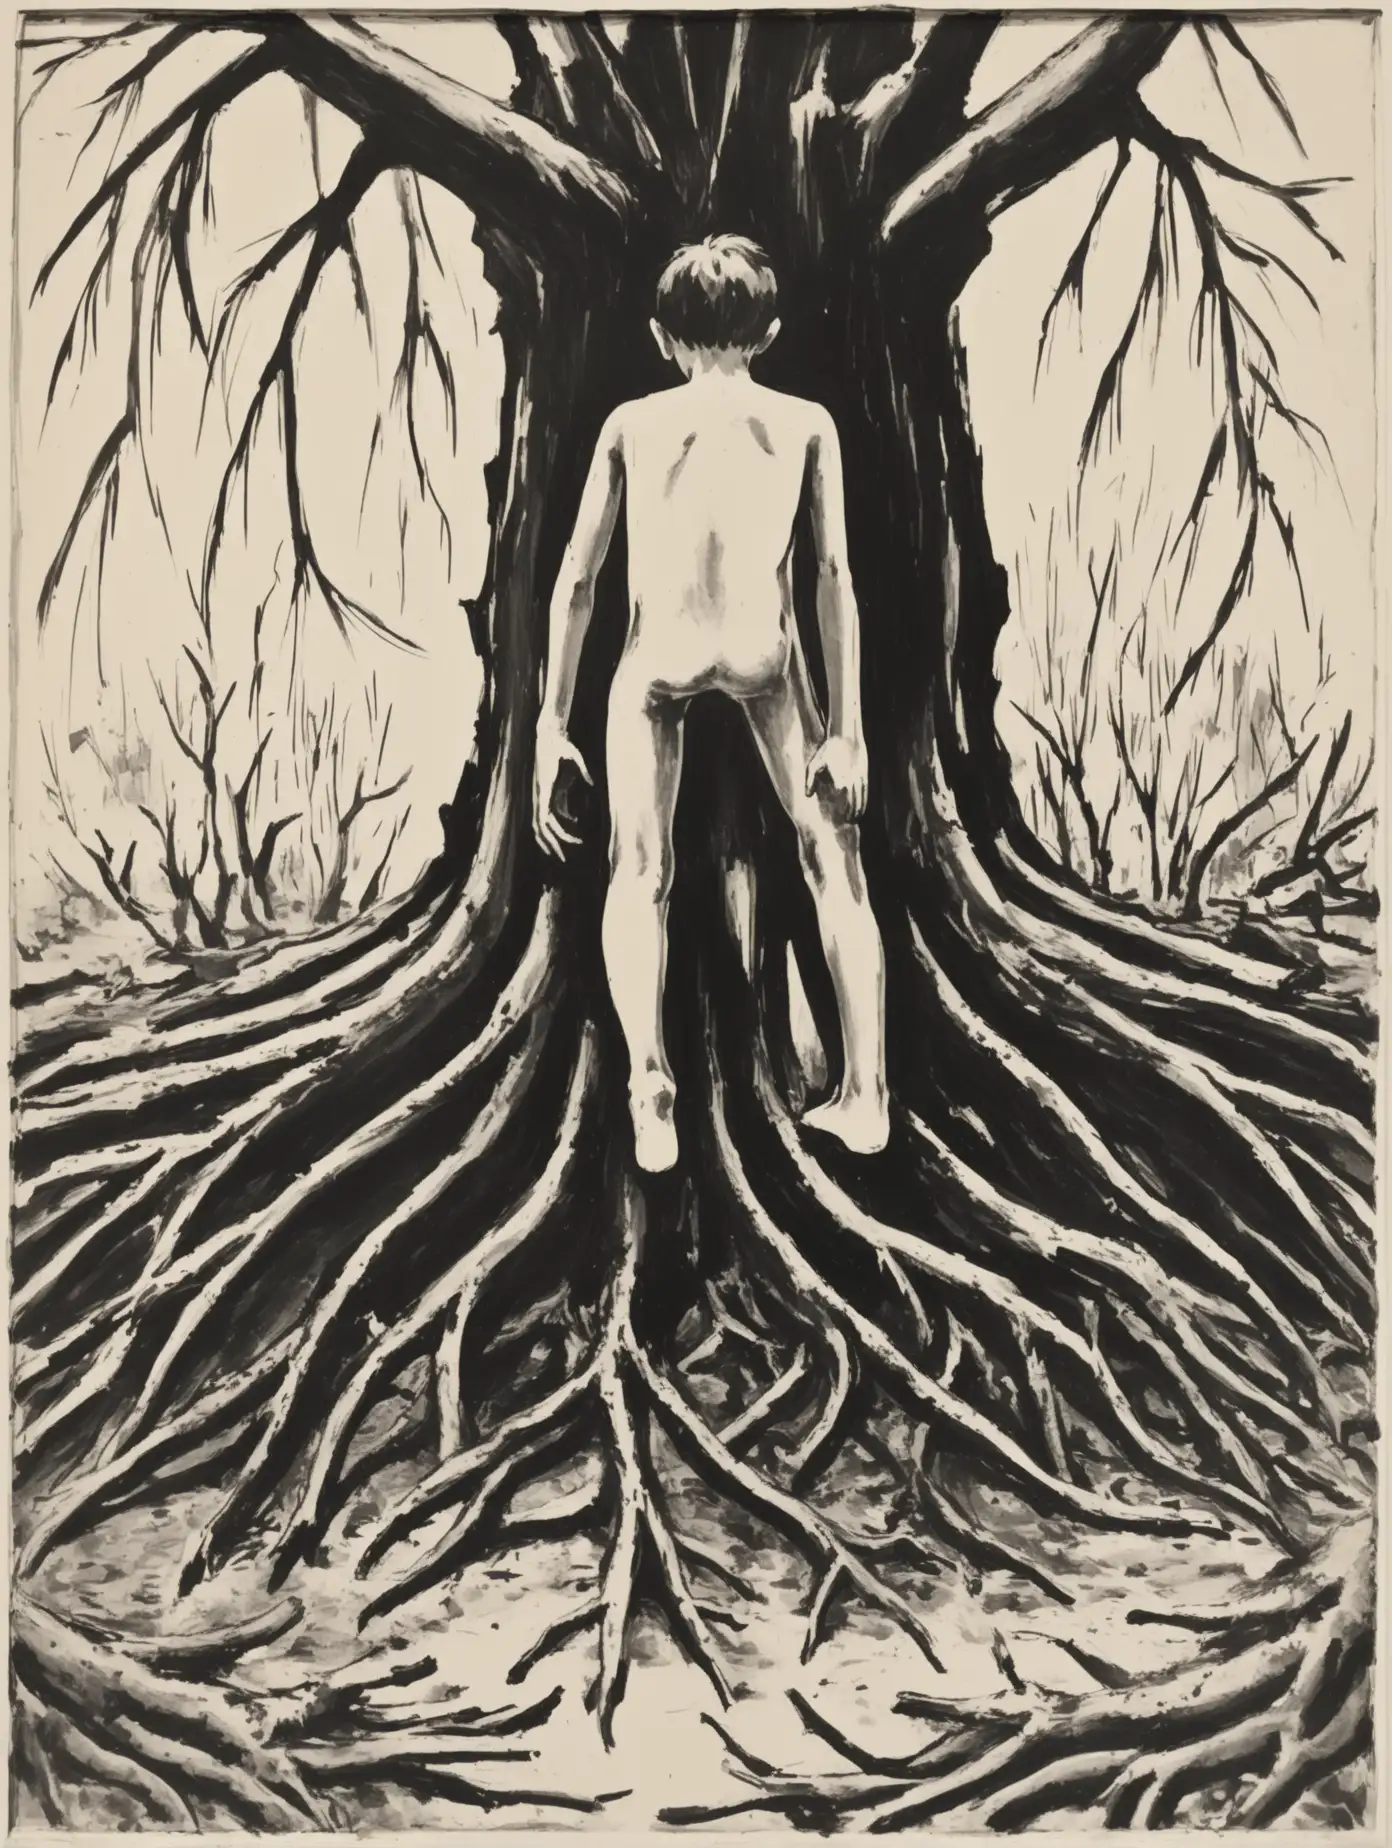 A simple black and white painting from the beginning of the 20th century is drawn with brush strokes of the figure of a boy about 12 years old standing from his back whose legs become tree roots